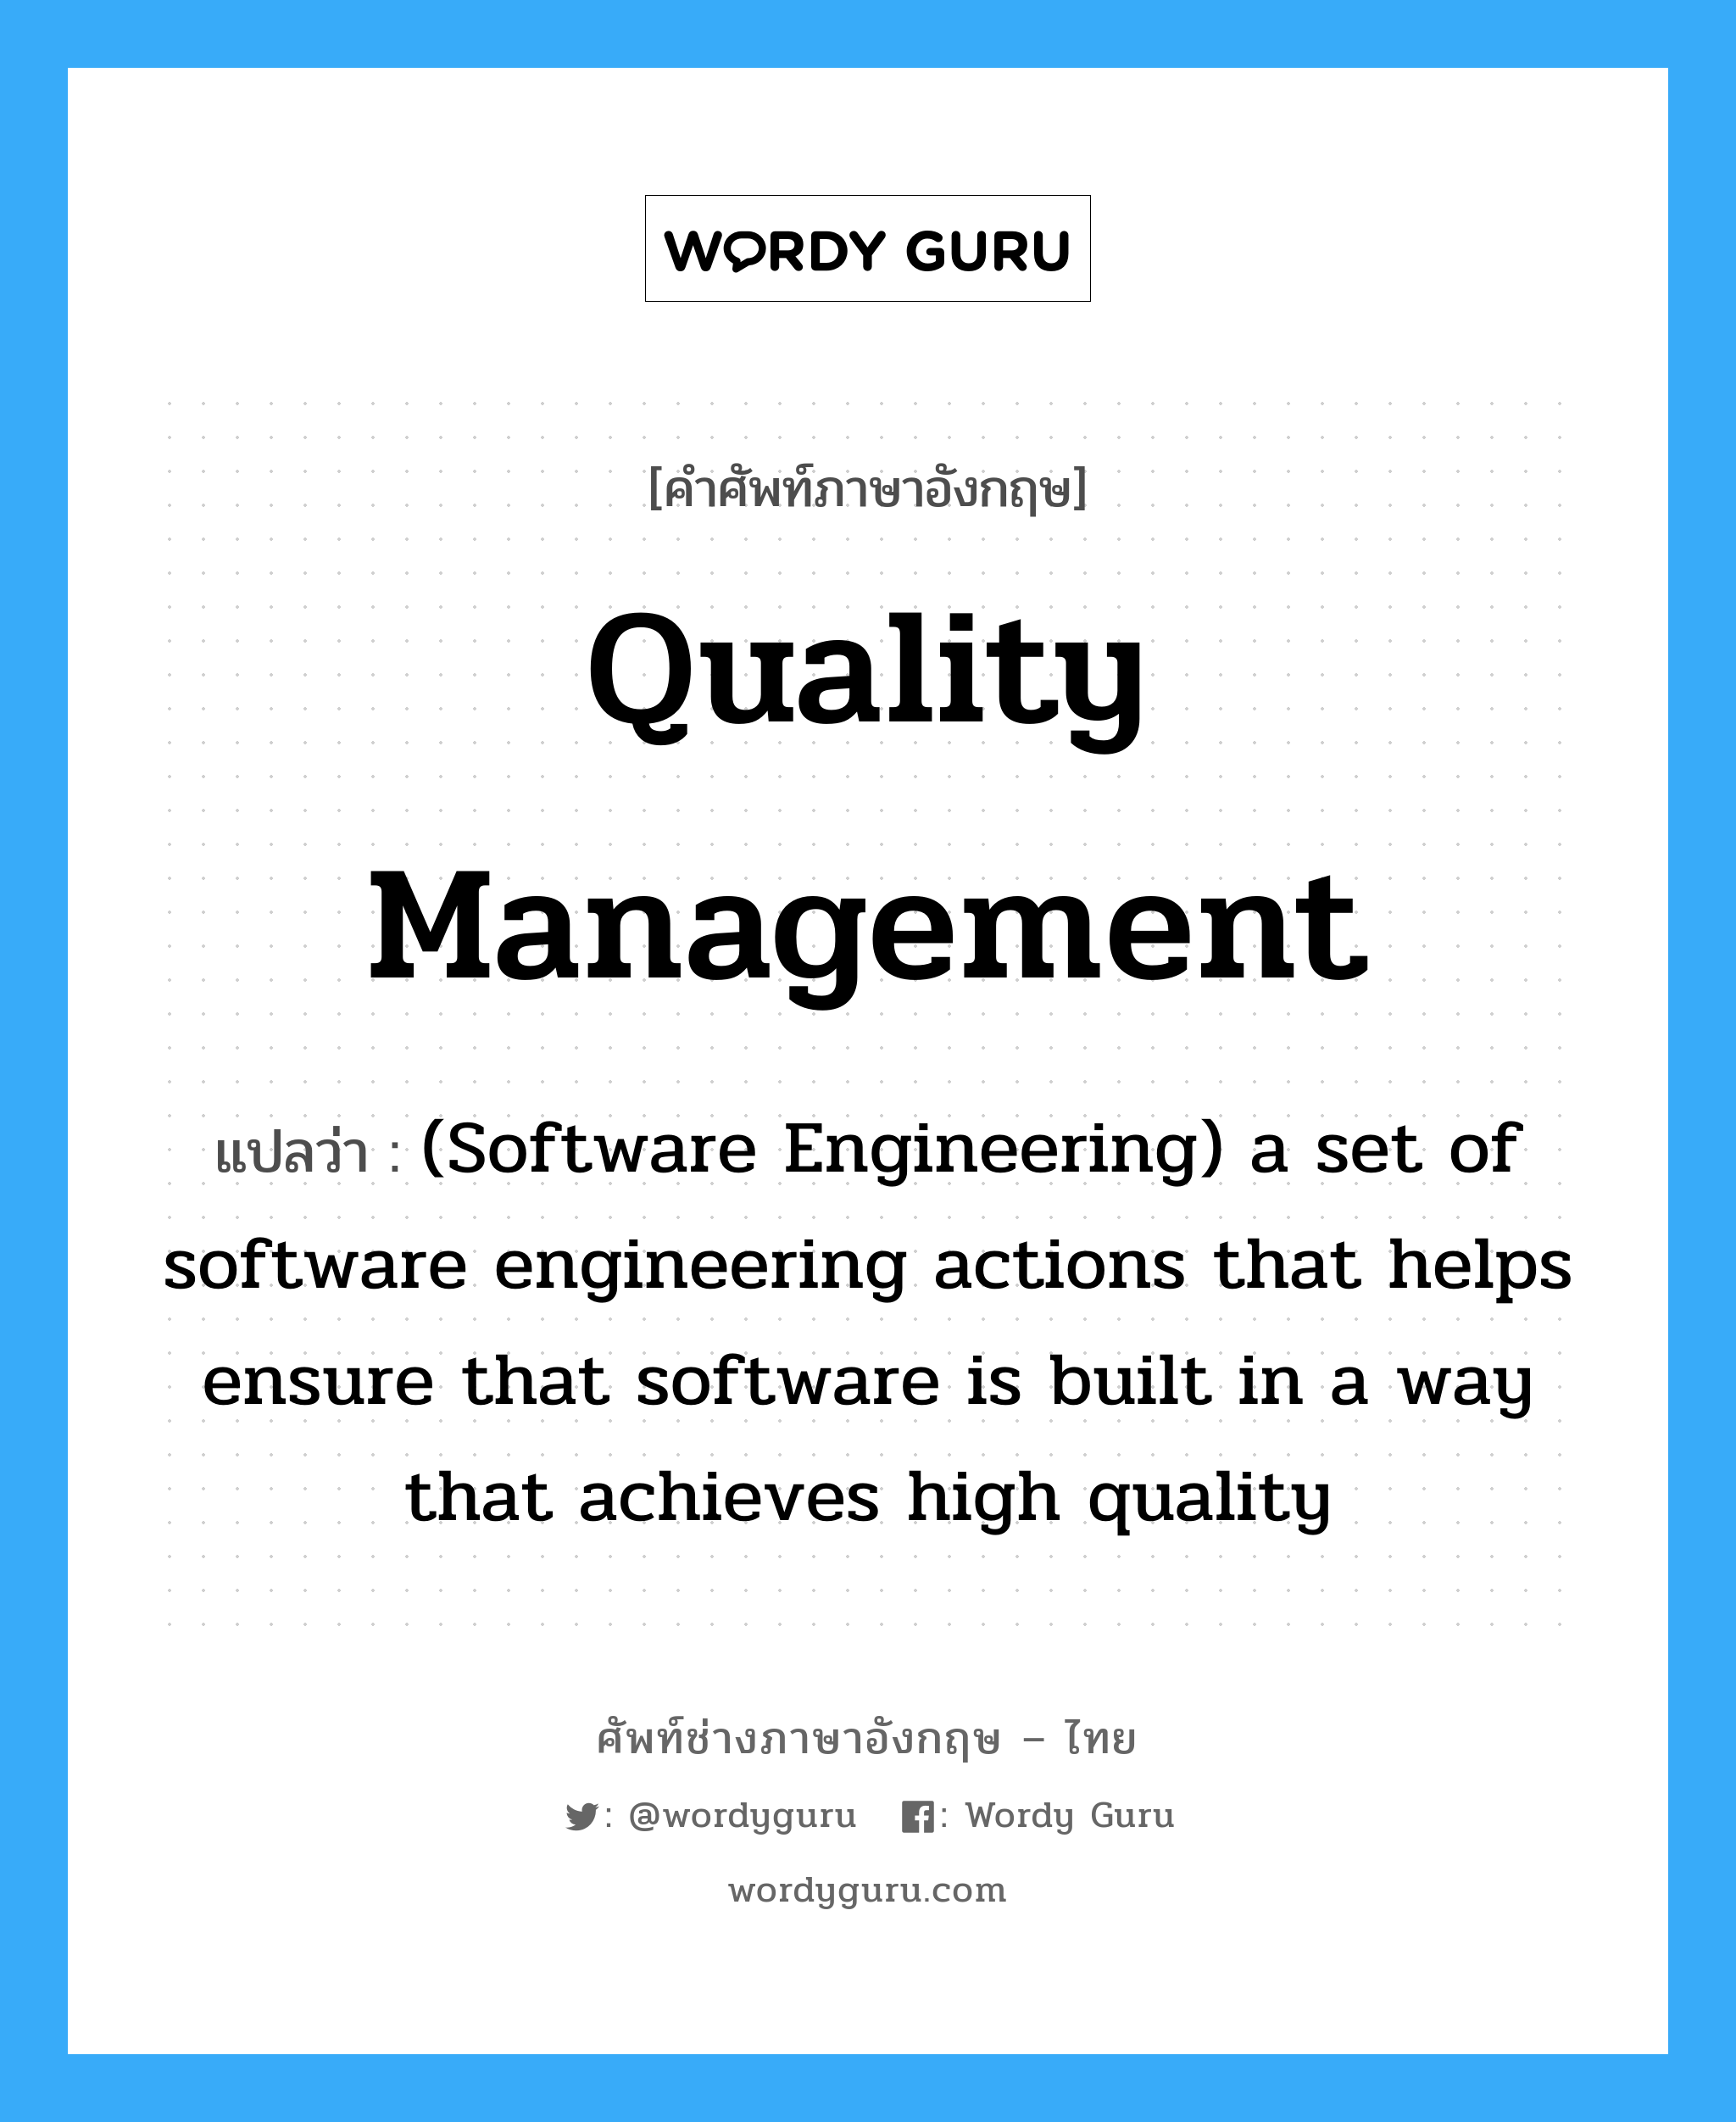 (Software Engineering) a set of software engineering activities that attempt to improve the state of software engineering practice within an organization ภาษาอังกฤษ?, คำศัพท์ช่างภาษาอังกฤษ - ไทย (Software Engineering) a set of software engineering actions that helps ensure that software is built in a way that achieves high quality คำศัพท์ภาษาอังกฤษ (Software Engineering) a set of software engineering actions that helps ensure that software is built in a way that achieves high quality แปลว่า Quality management